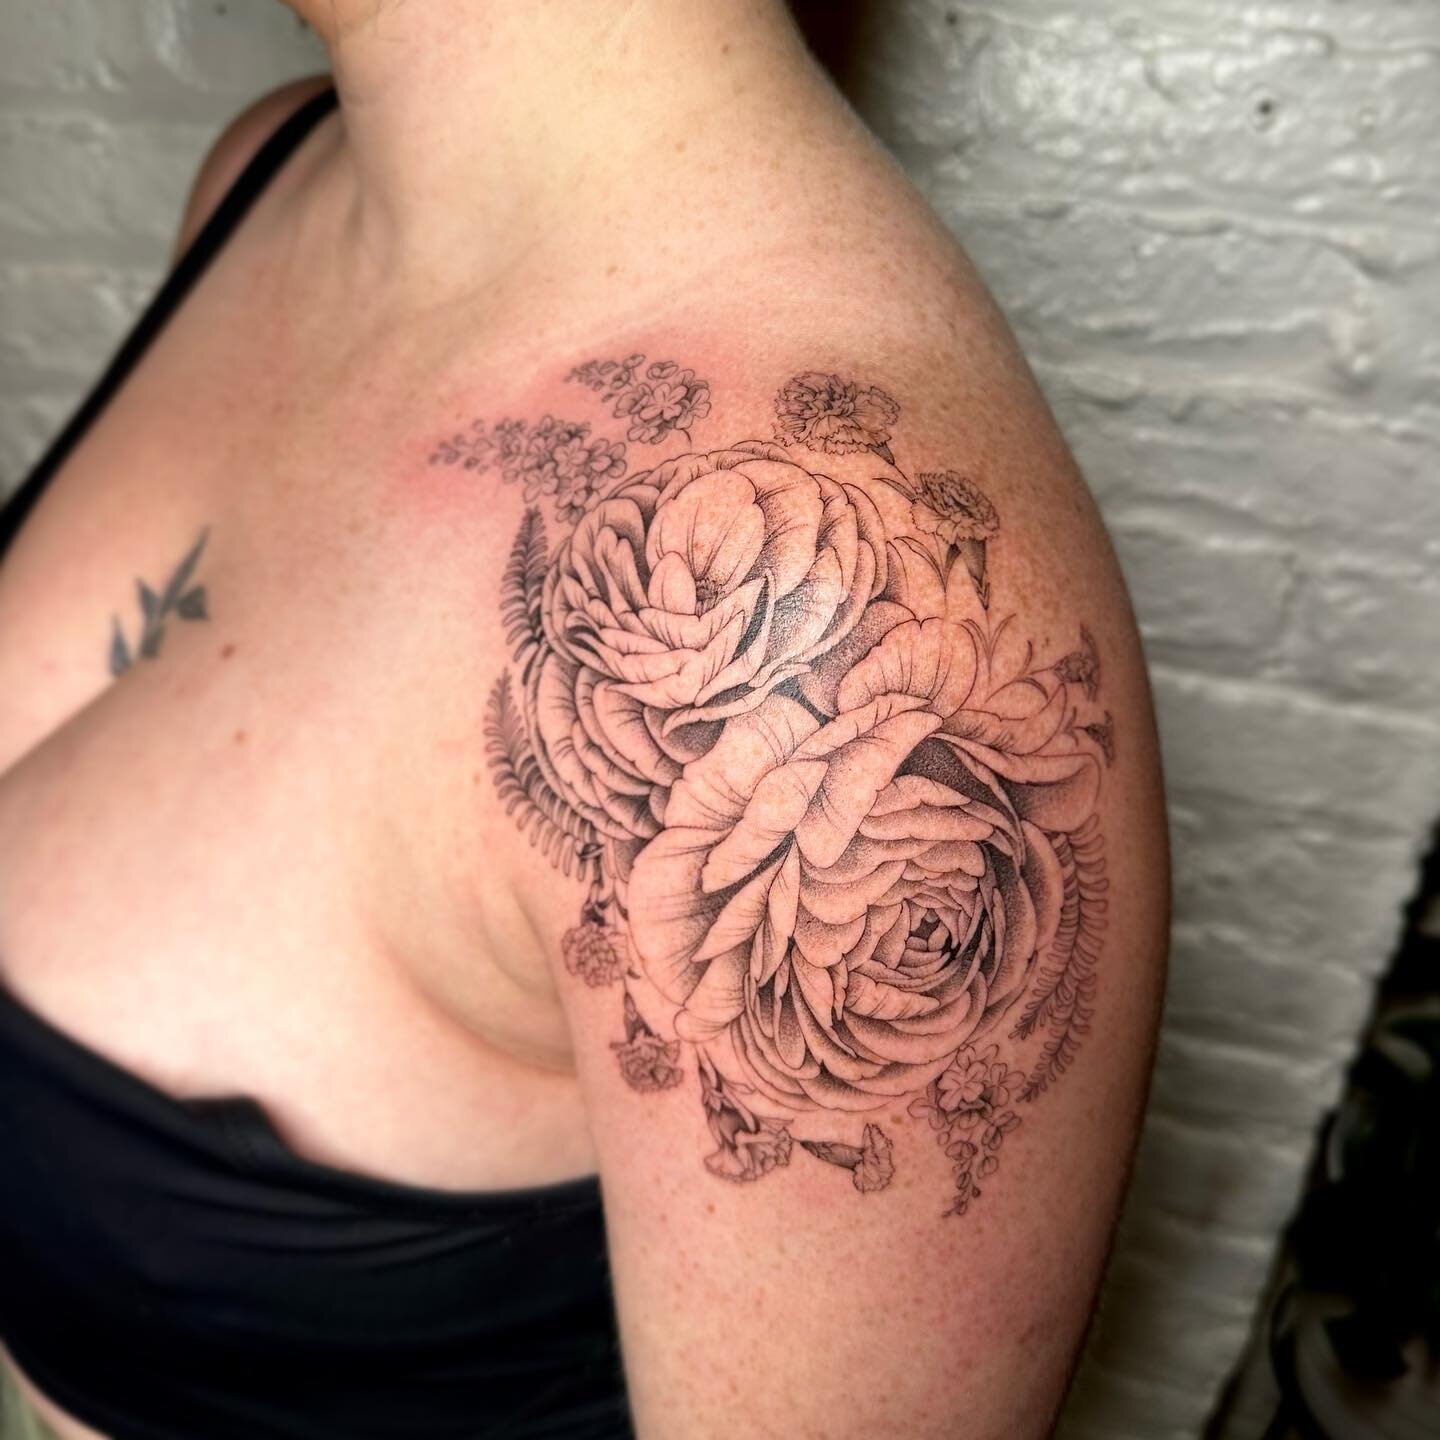 Ranunculus, lilacs, carnations and ferns. 

👉 Swipe to see a close up of those #details 
🌿🌿🌿
&hellip;
&hellip;
&hellip;
&hellip;
&hellip;
&hellip;
#finelinetattoo #dotworktattoo #floraltattoo #flowertattoo #shouldertattoo #singleneedletattoo #chi